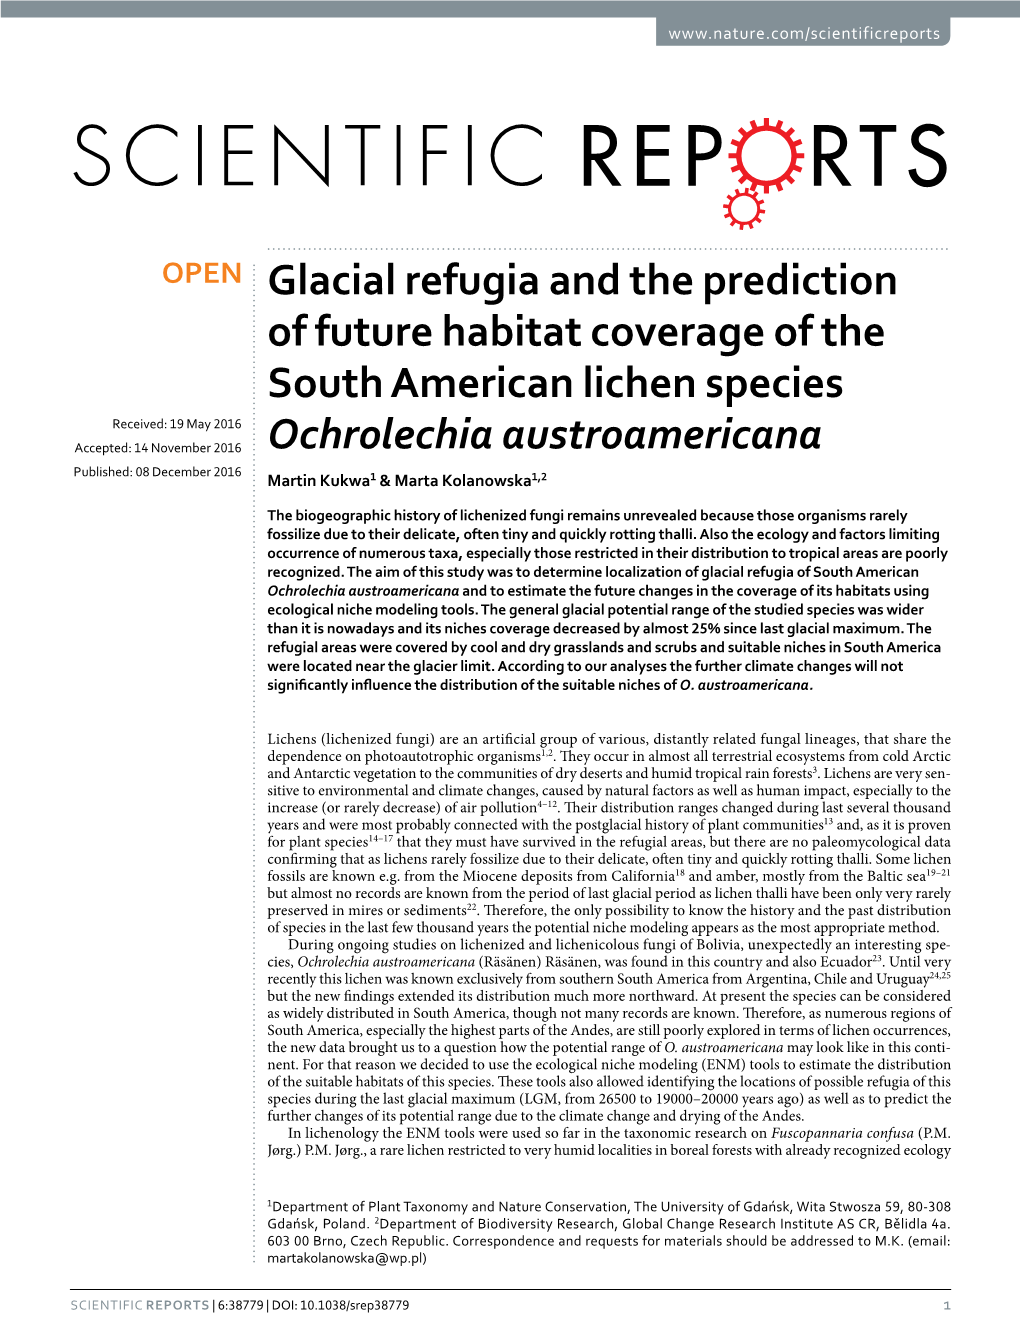 Glacial Refugia and the Prediction of Future Habitat Coverage of the South